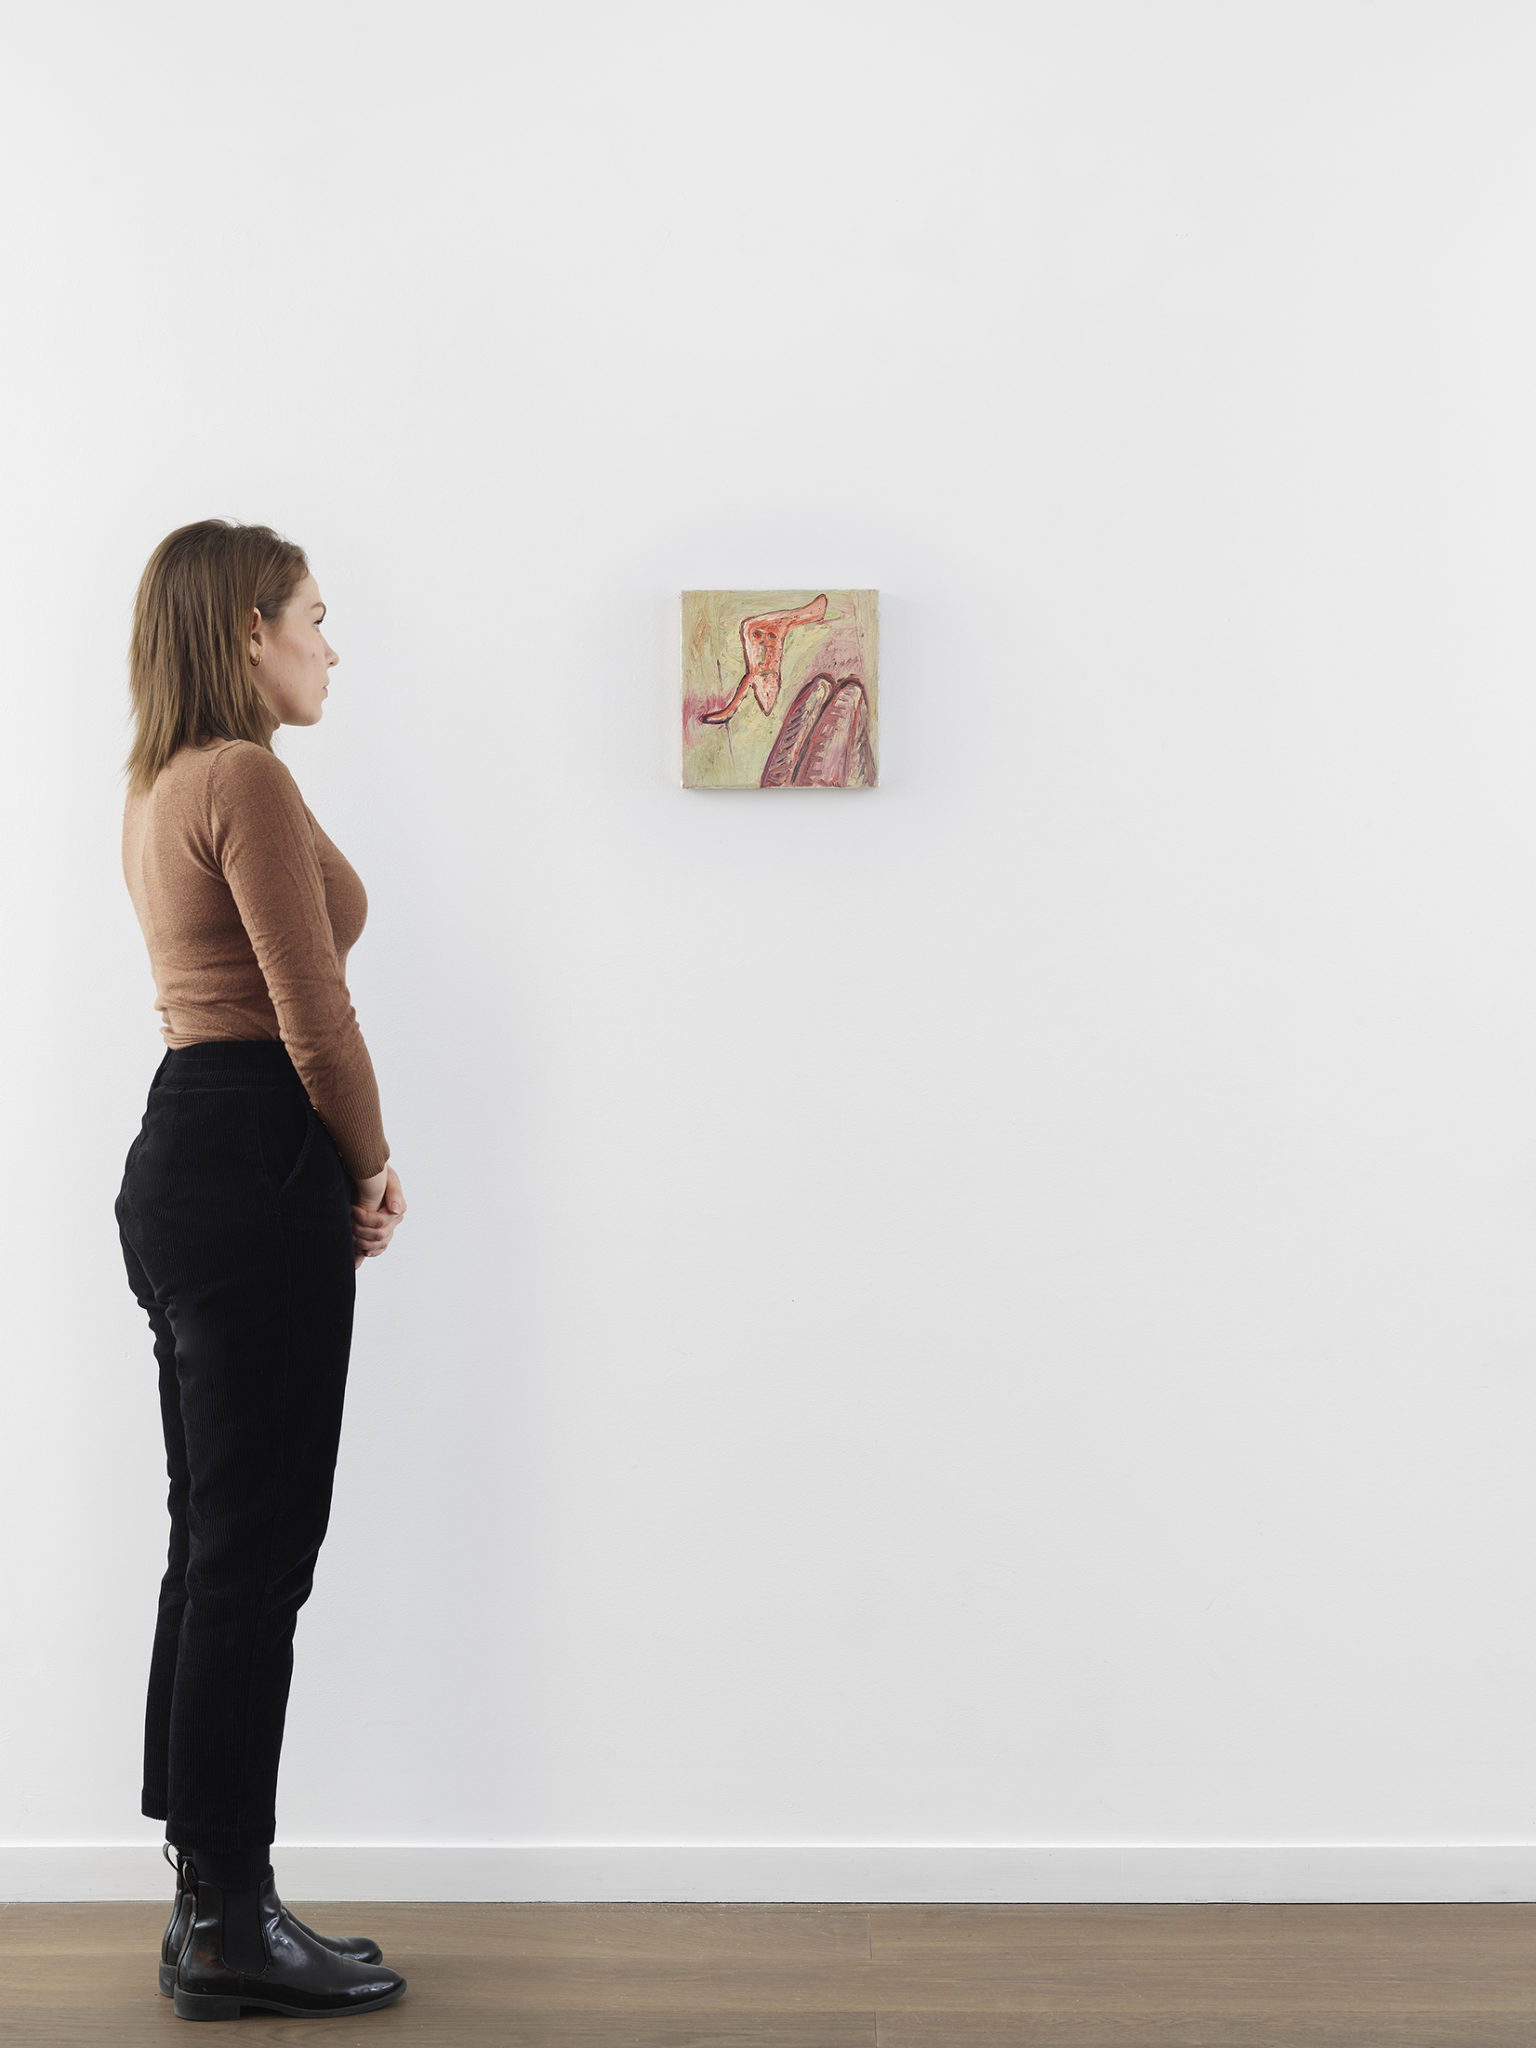 Model standing in front of Jutta Koether's Jane Bowles painting